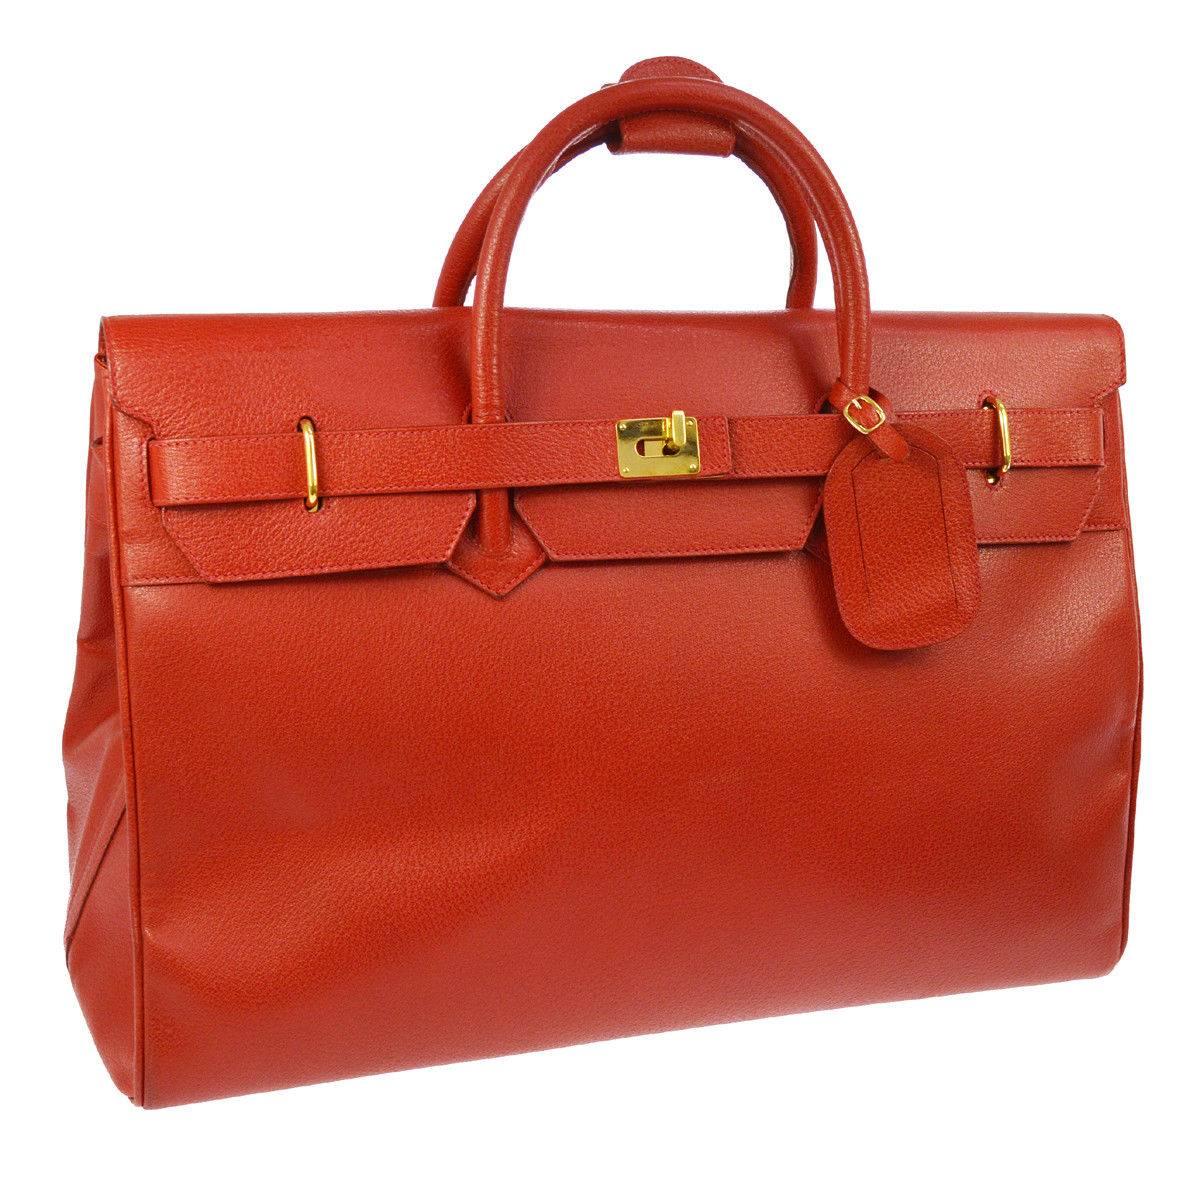 Gucci Red Leather Large Carryall Birkin Style Travel Weekender Top Handle Bag